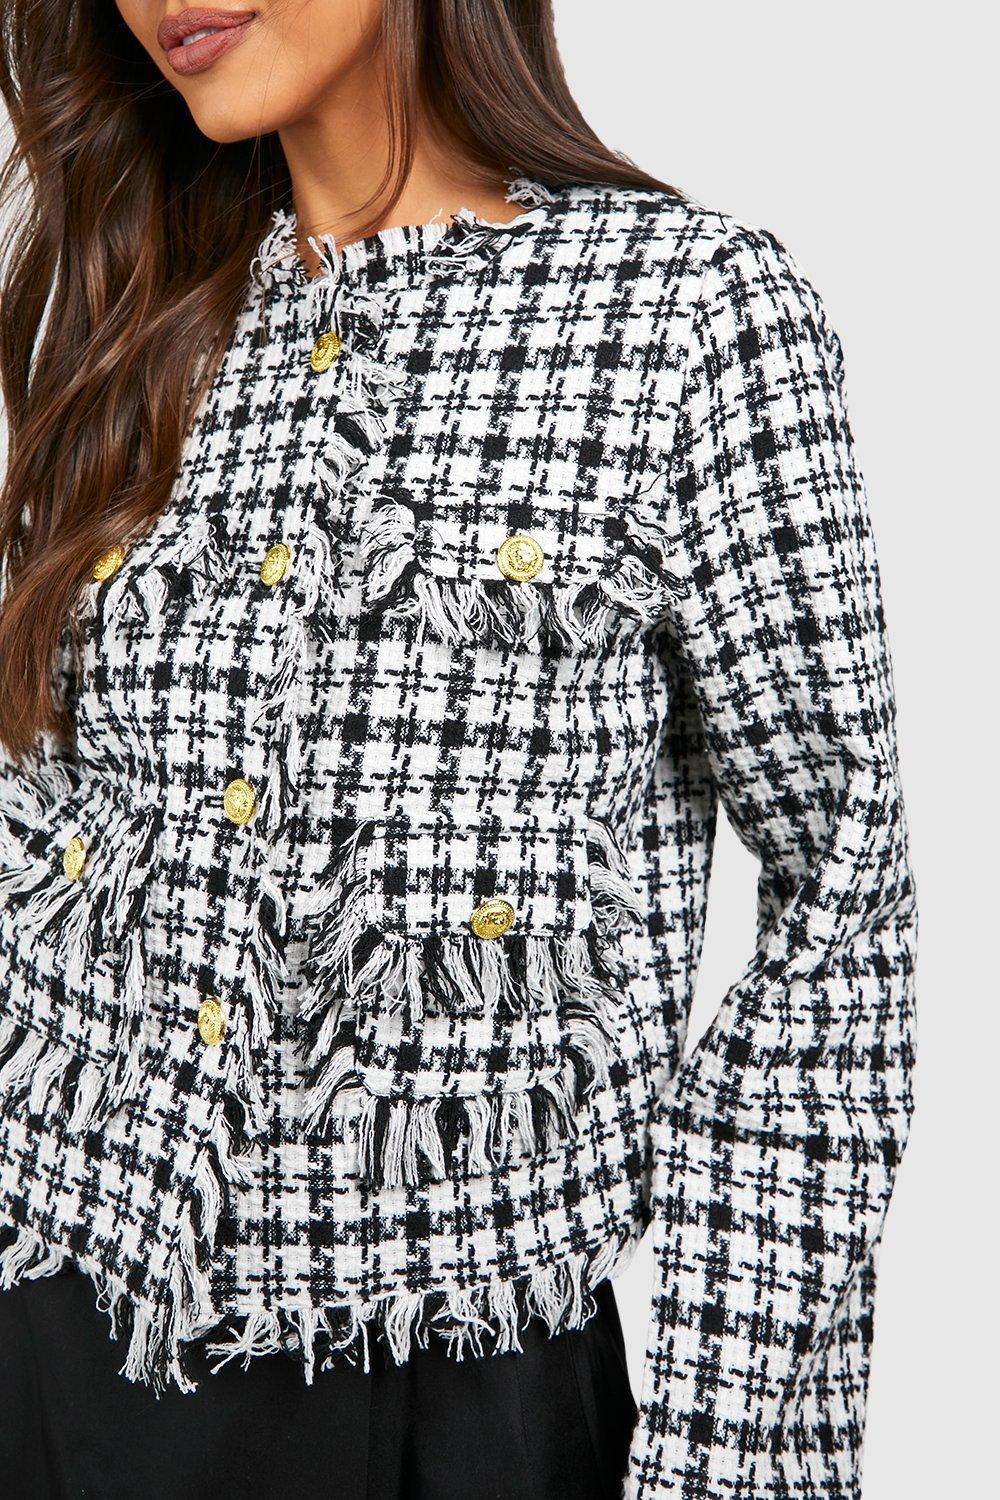 Black And White Houndstooth Blazer Coat With Gold Buttons